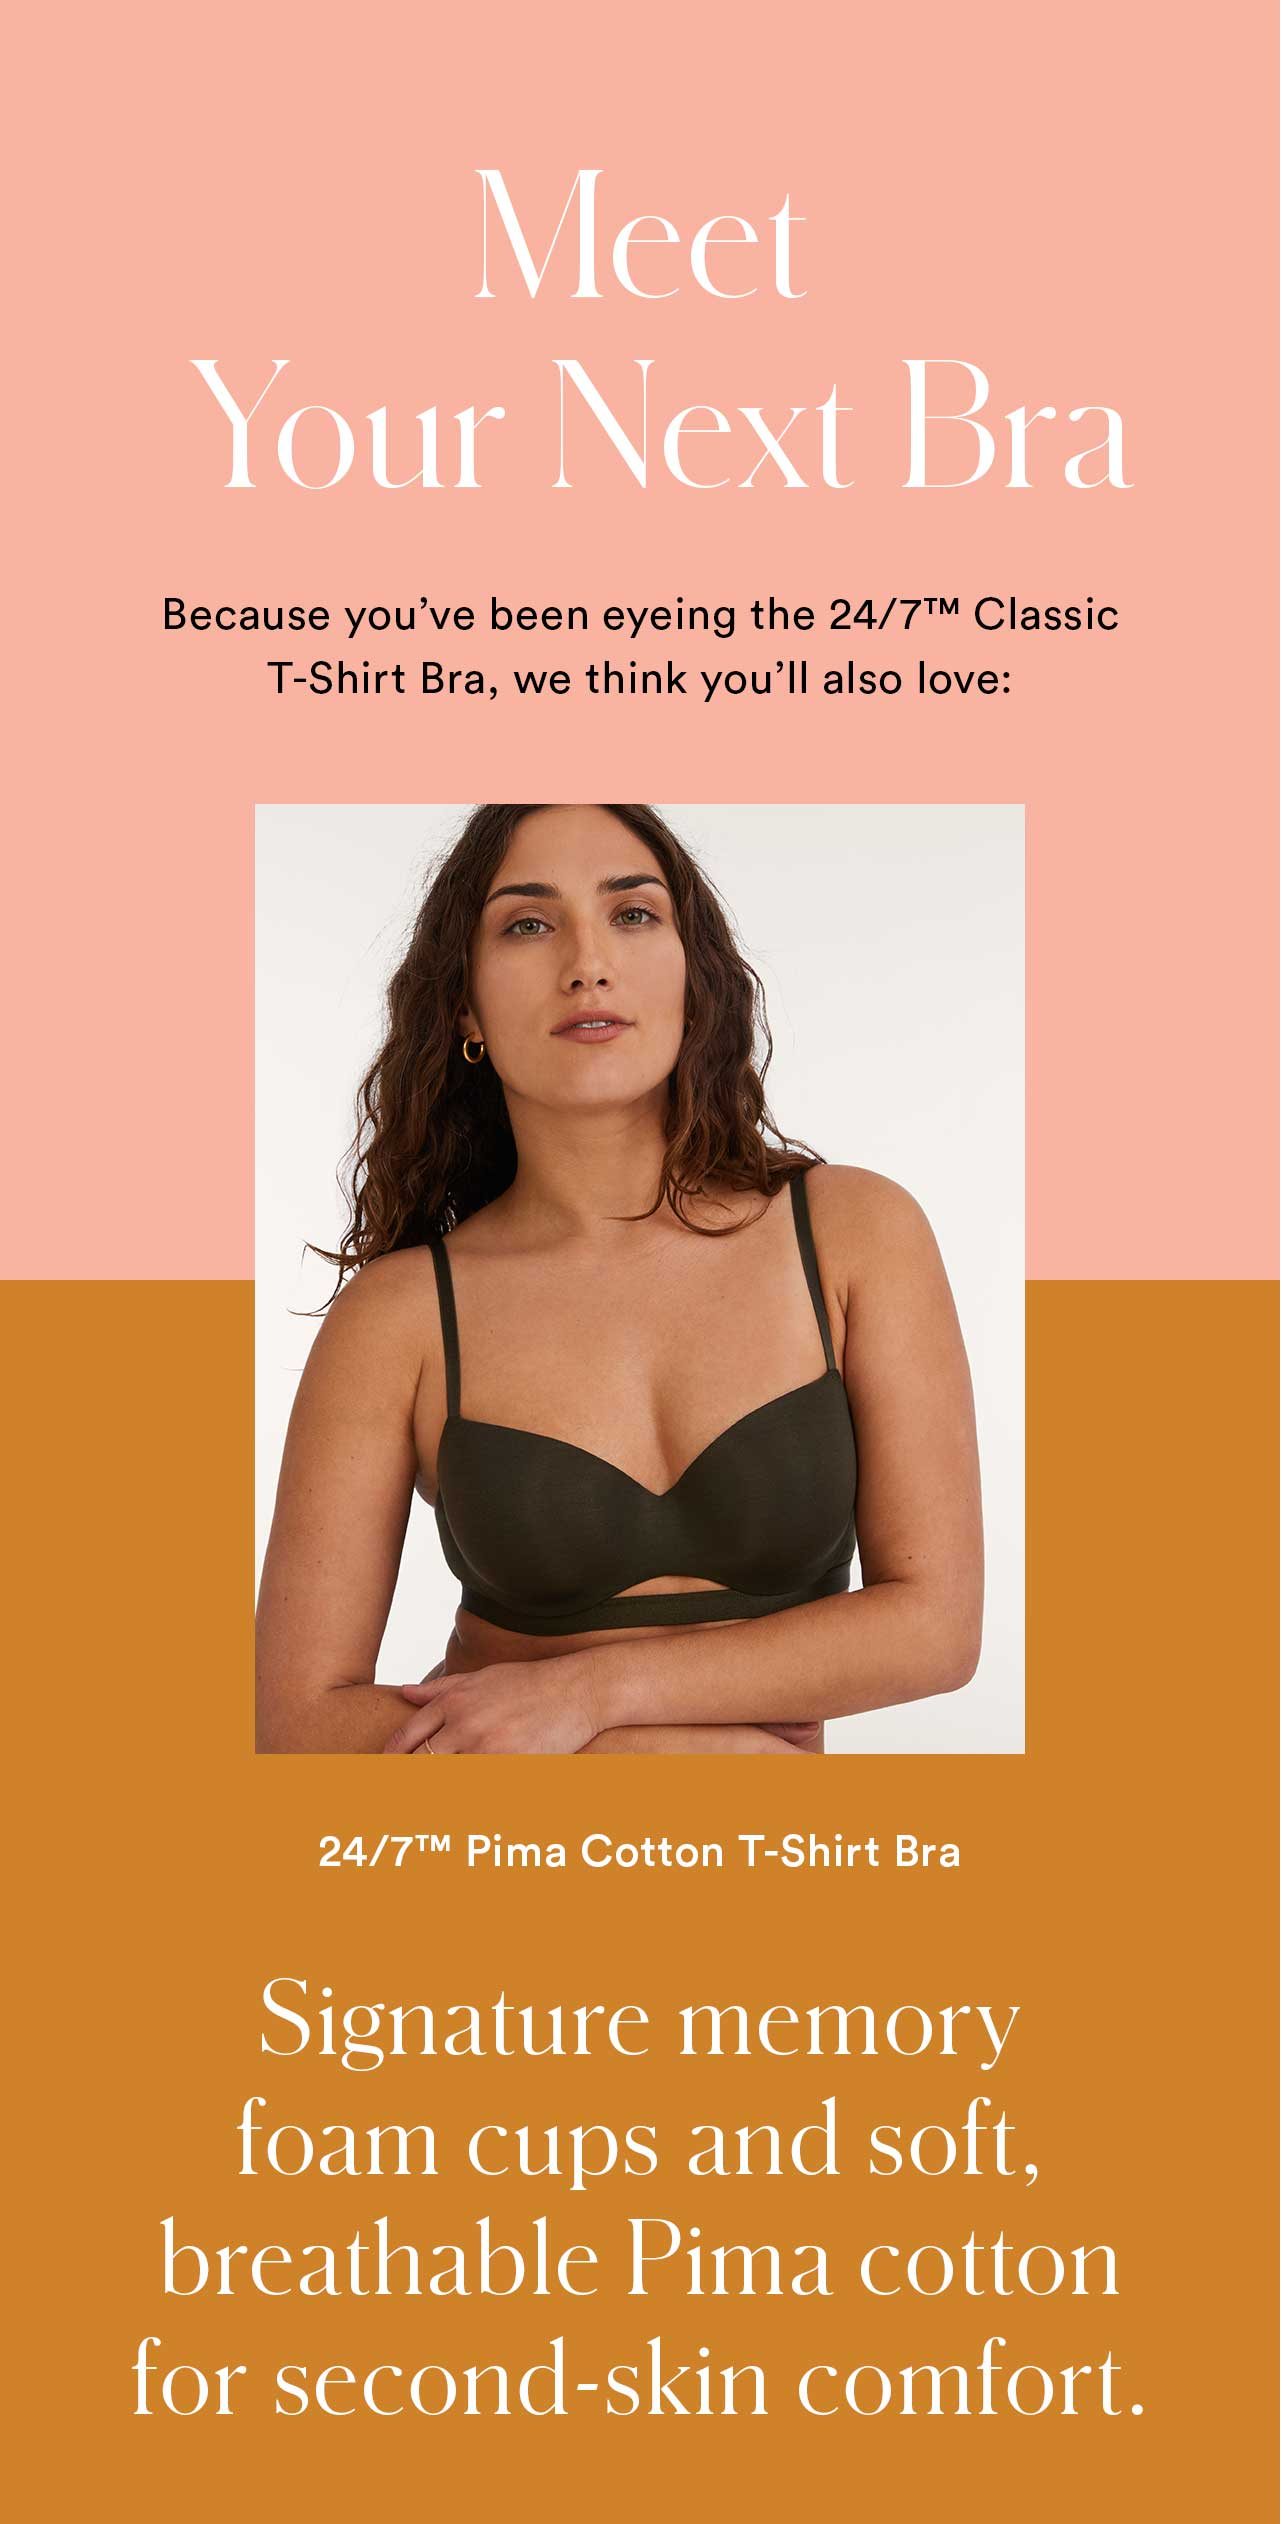 Meet Your Next Bra | Because you’ve been eyeing the 24/7™ Classic T-Shirt Bra, we think you’ll also love: 24/7™ Cotton T-Shirt Bra | Signature memory foam cups and soft, breathable Pima cotton for second-skin comfort.